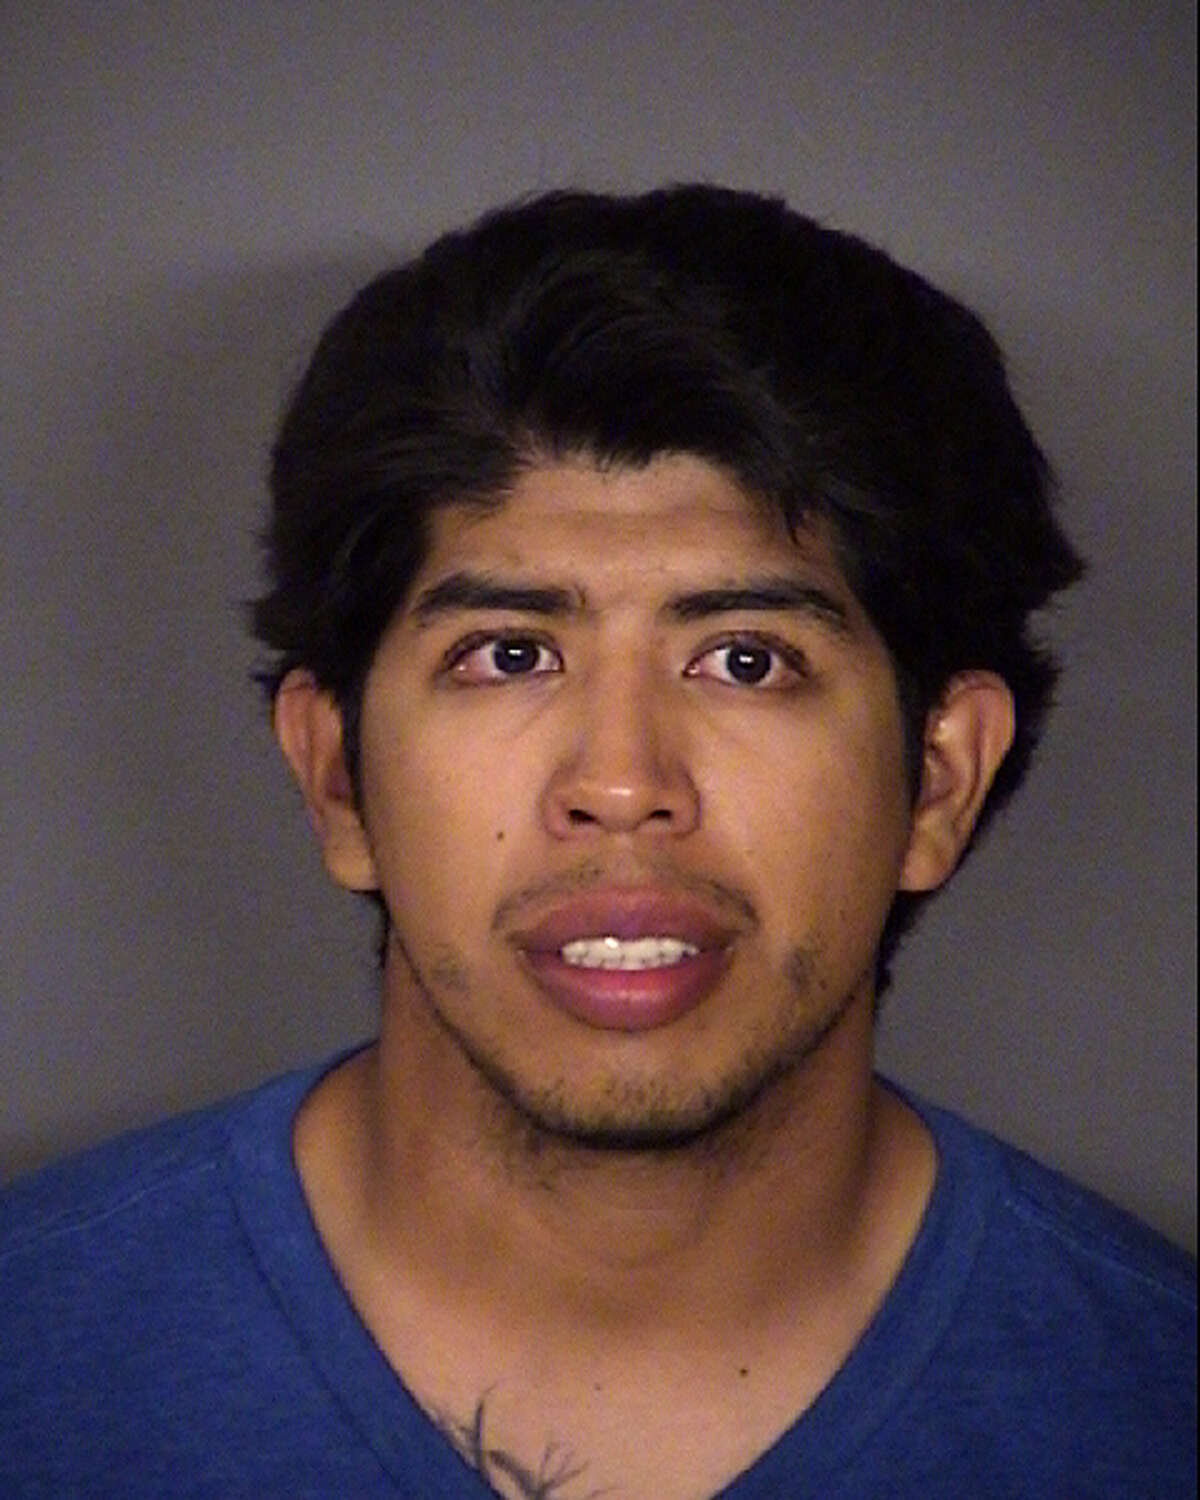 Jimmy Farias, 22, was arrested Feb. 20, 2017, on a first-degree felony charge of continuous sexual abuse of a child.